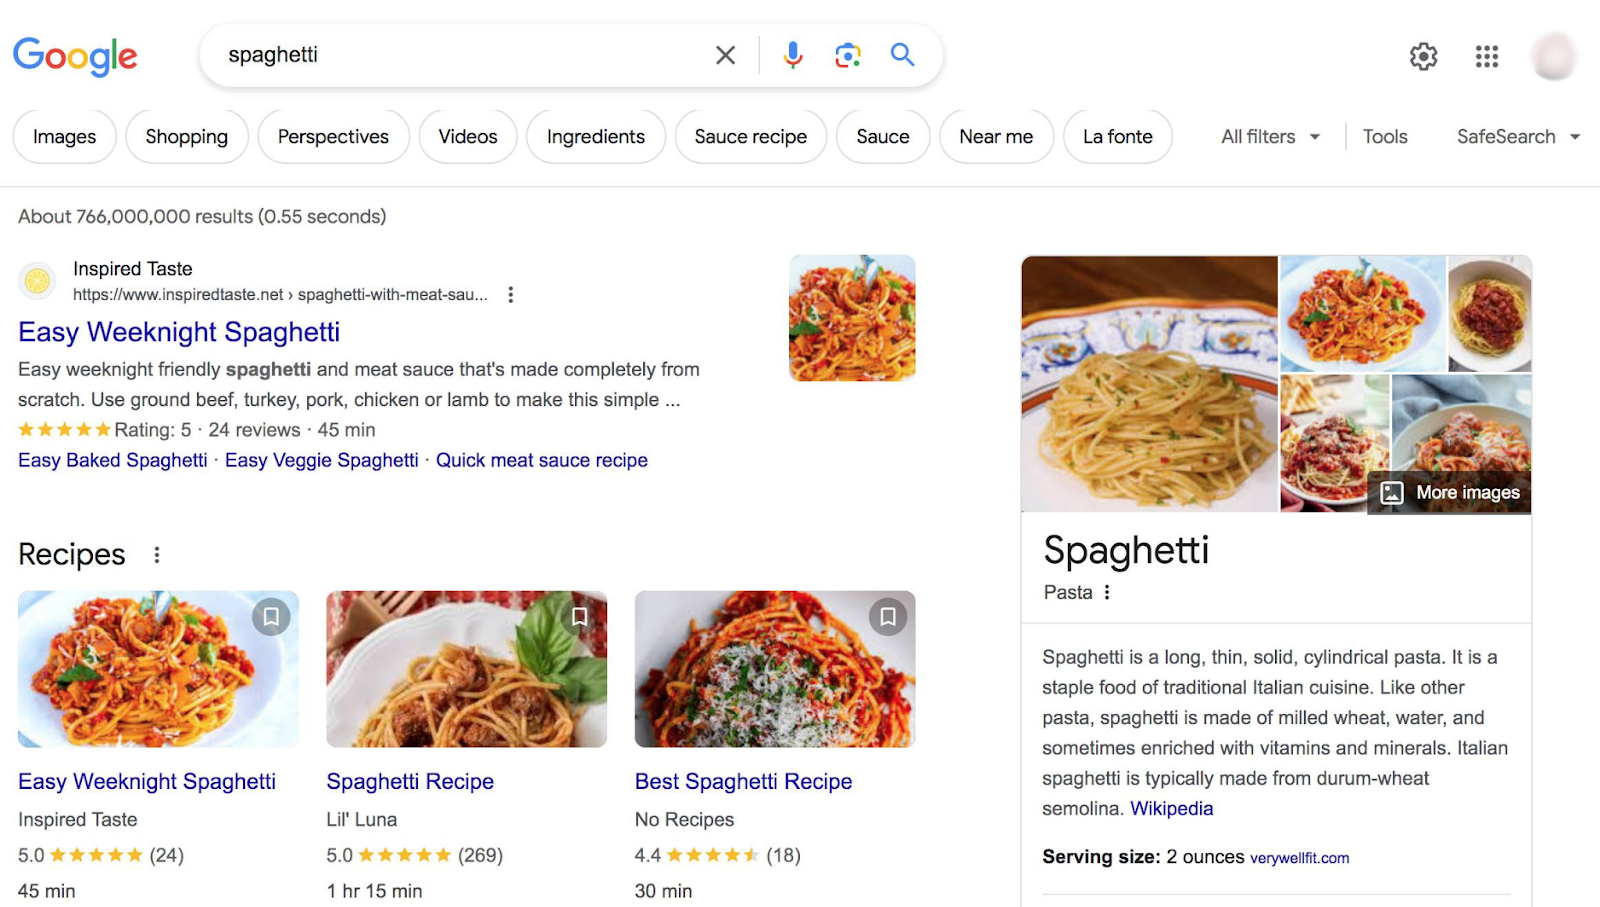 Top of Google's effect   for “spaghetti” query